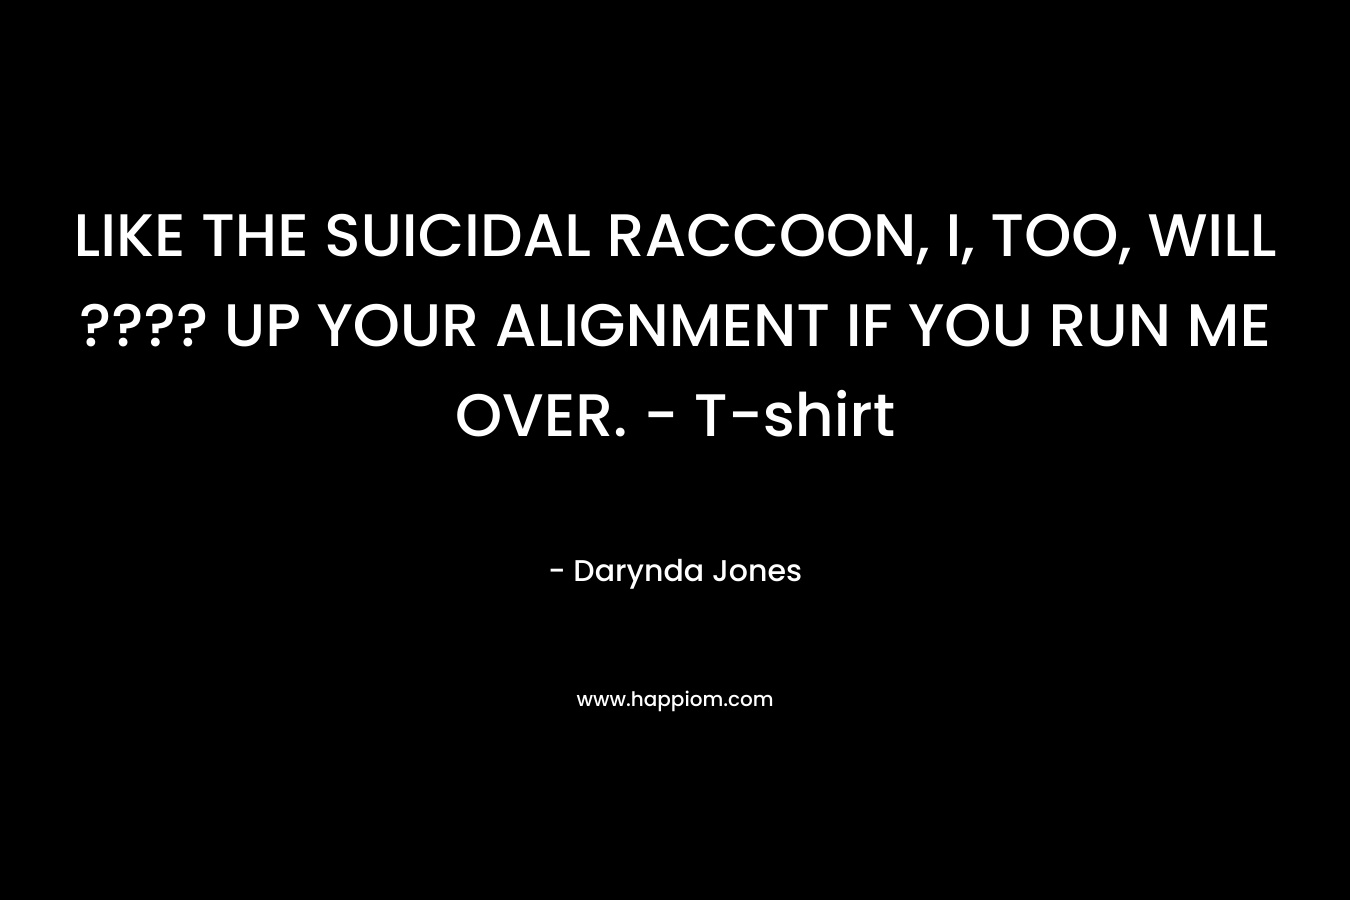 LIKE THE SUICIDAL RACCOON, I, TOO, WILL ???? UP YOUR ALIGNMENT IF YOU RUN ME OVER. - T-shirt